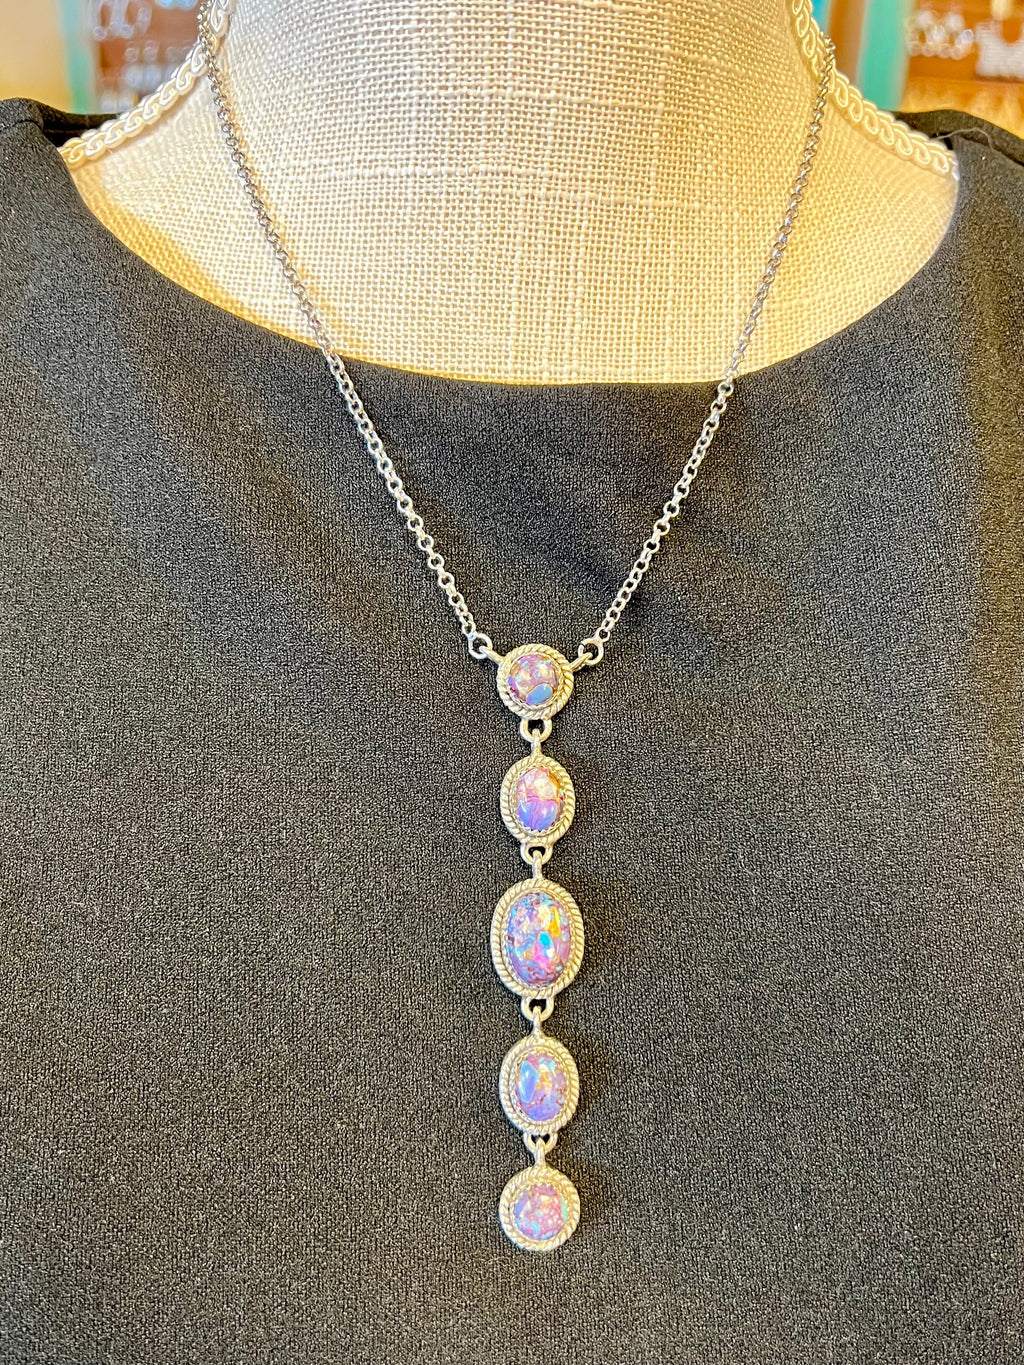 This exclusive Purple Rain Dangling Necklace is crafted with genuine sterling silver and set with genuine purple Mojave stones for a luxurious look. An 8" chain holds a 3" dangle pendant, adjustable with a 2" claw clasp creating the perfect fit. Elevate your style with this elegant and tasteful necklace.